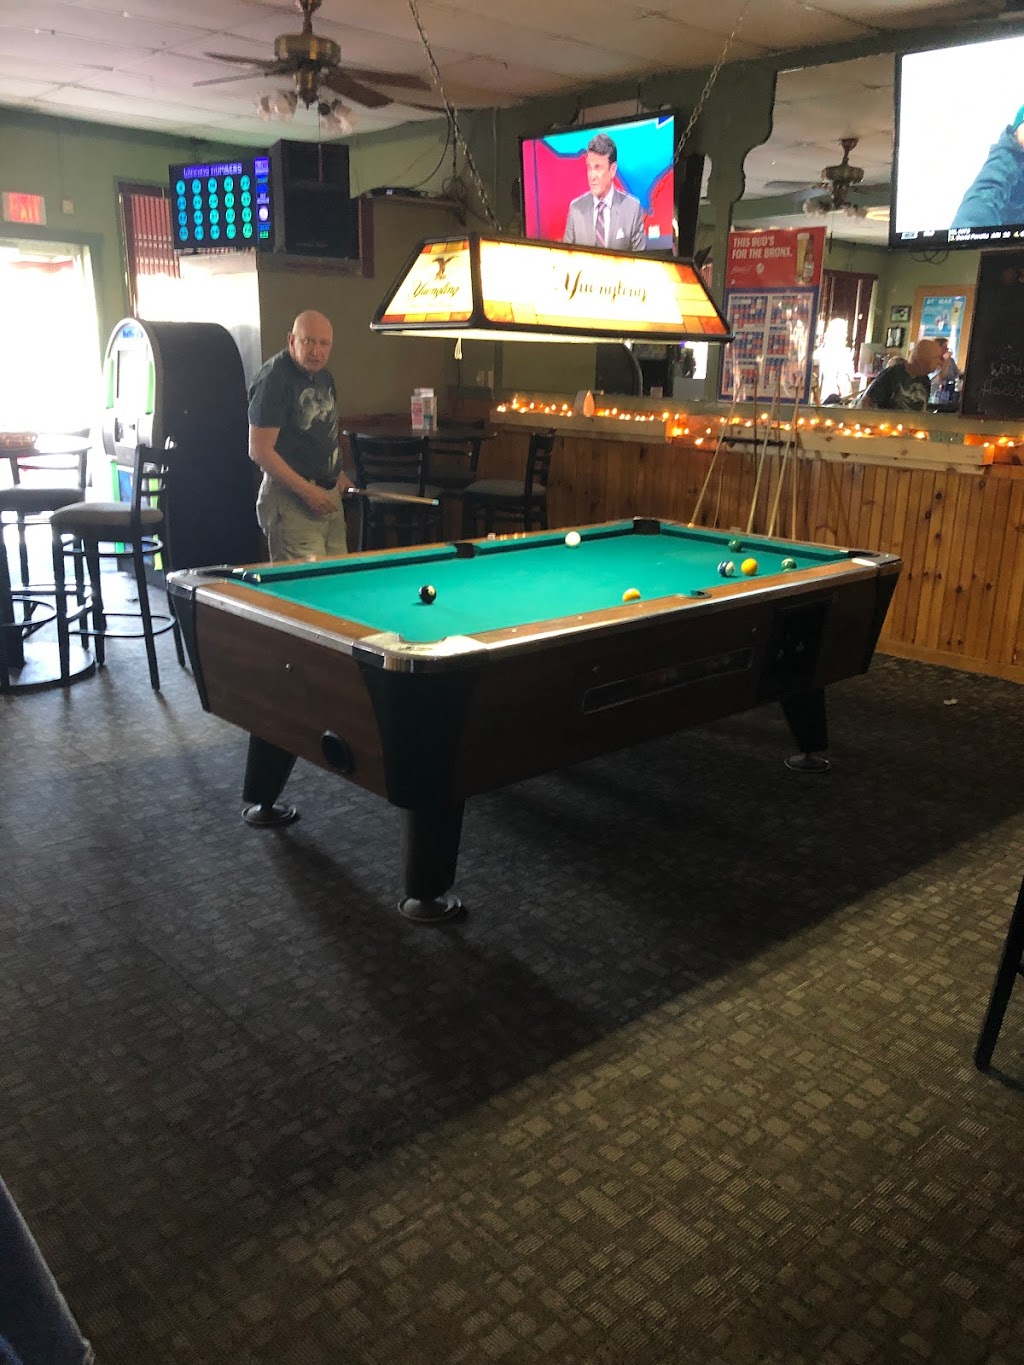 Jimmys Pub | 524 Enfield St, Enfield, CT 06082 | Phone: (860) 745-8002